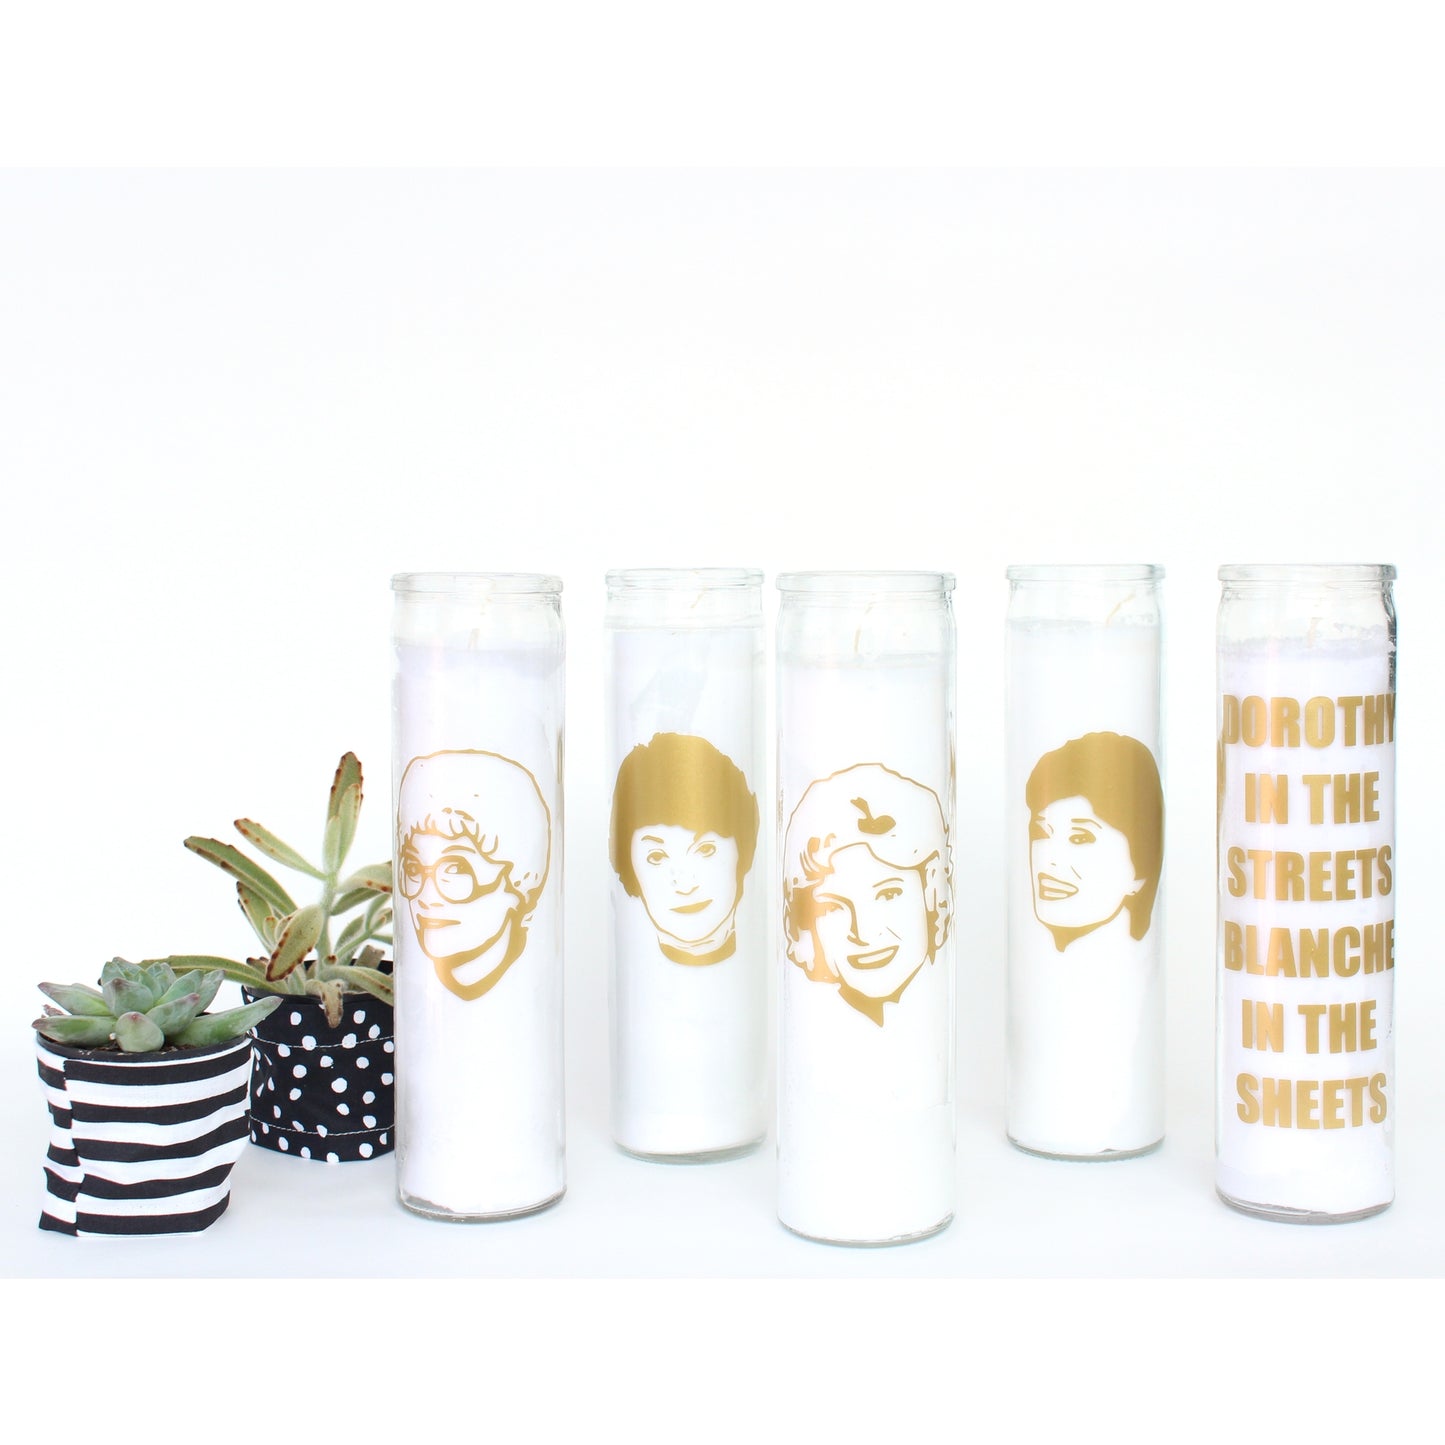 Dorothy in the Streets, Blanche in the Sheets Candle